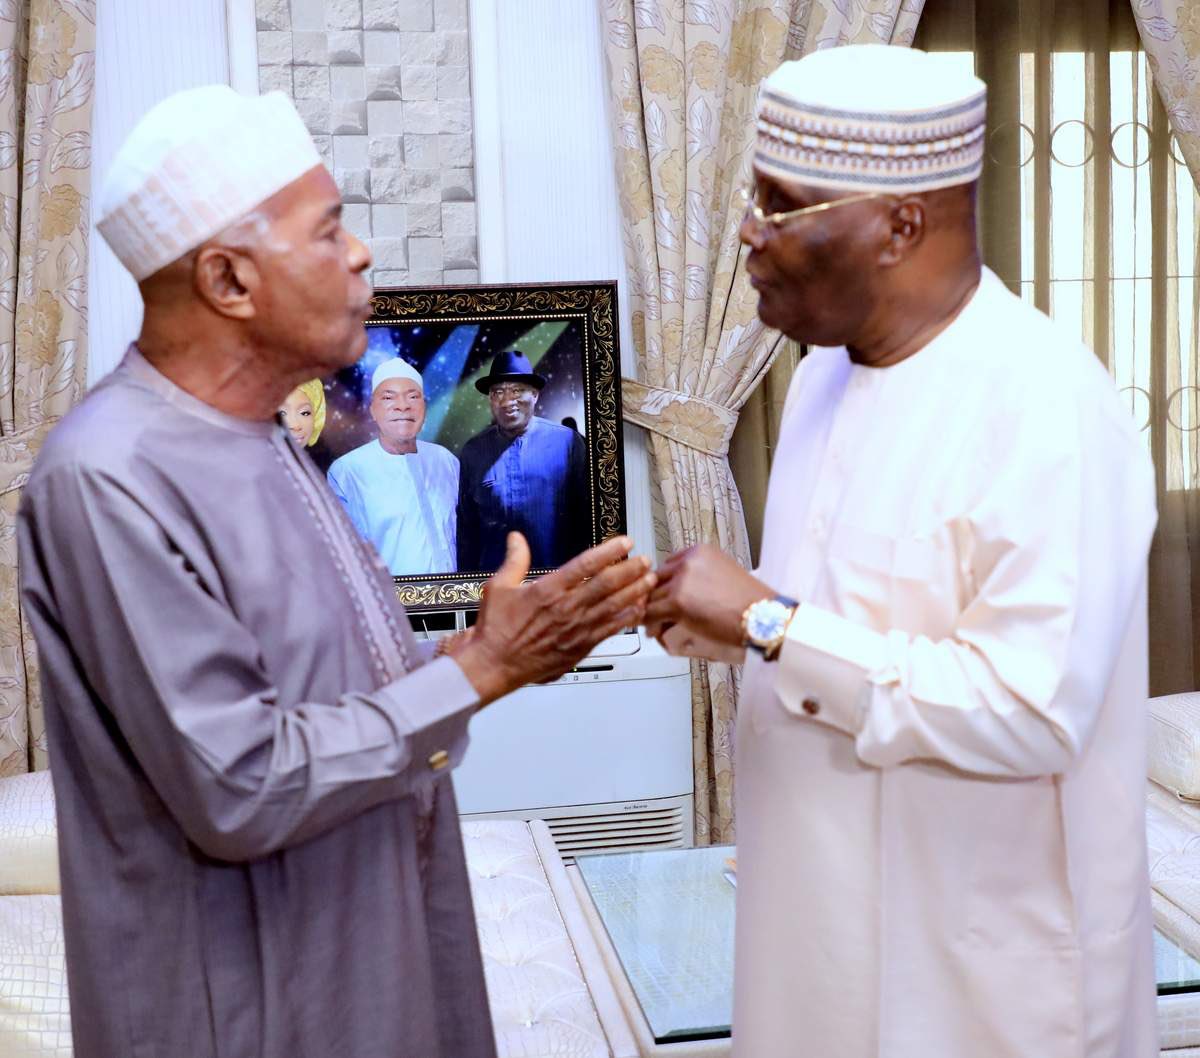 Earlier today, I led a delegation on a condolence visit to former governor of Kogi State, Alhaji Ibrahim Idris (Ibro), over the loss of his son, Hon. Mohammed Idris. May the Almighty Allah comfort the family and grant Aljannah Firdaus to his beloved son. -AA